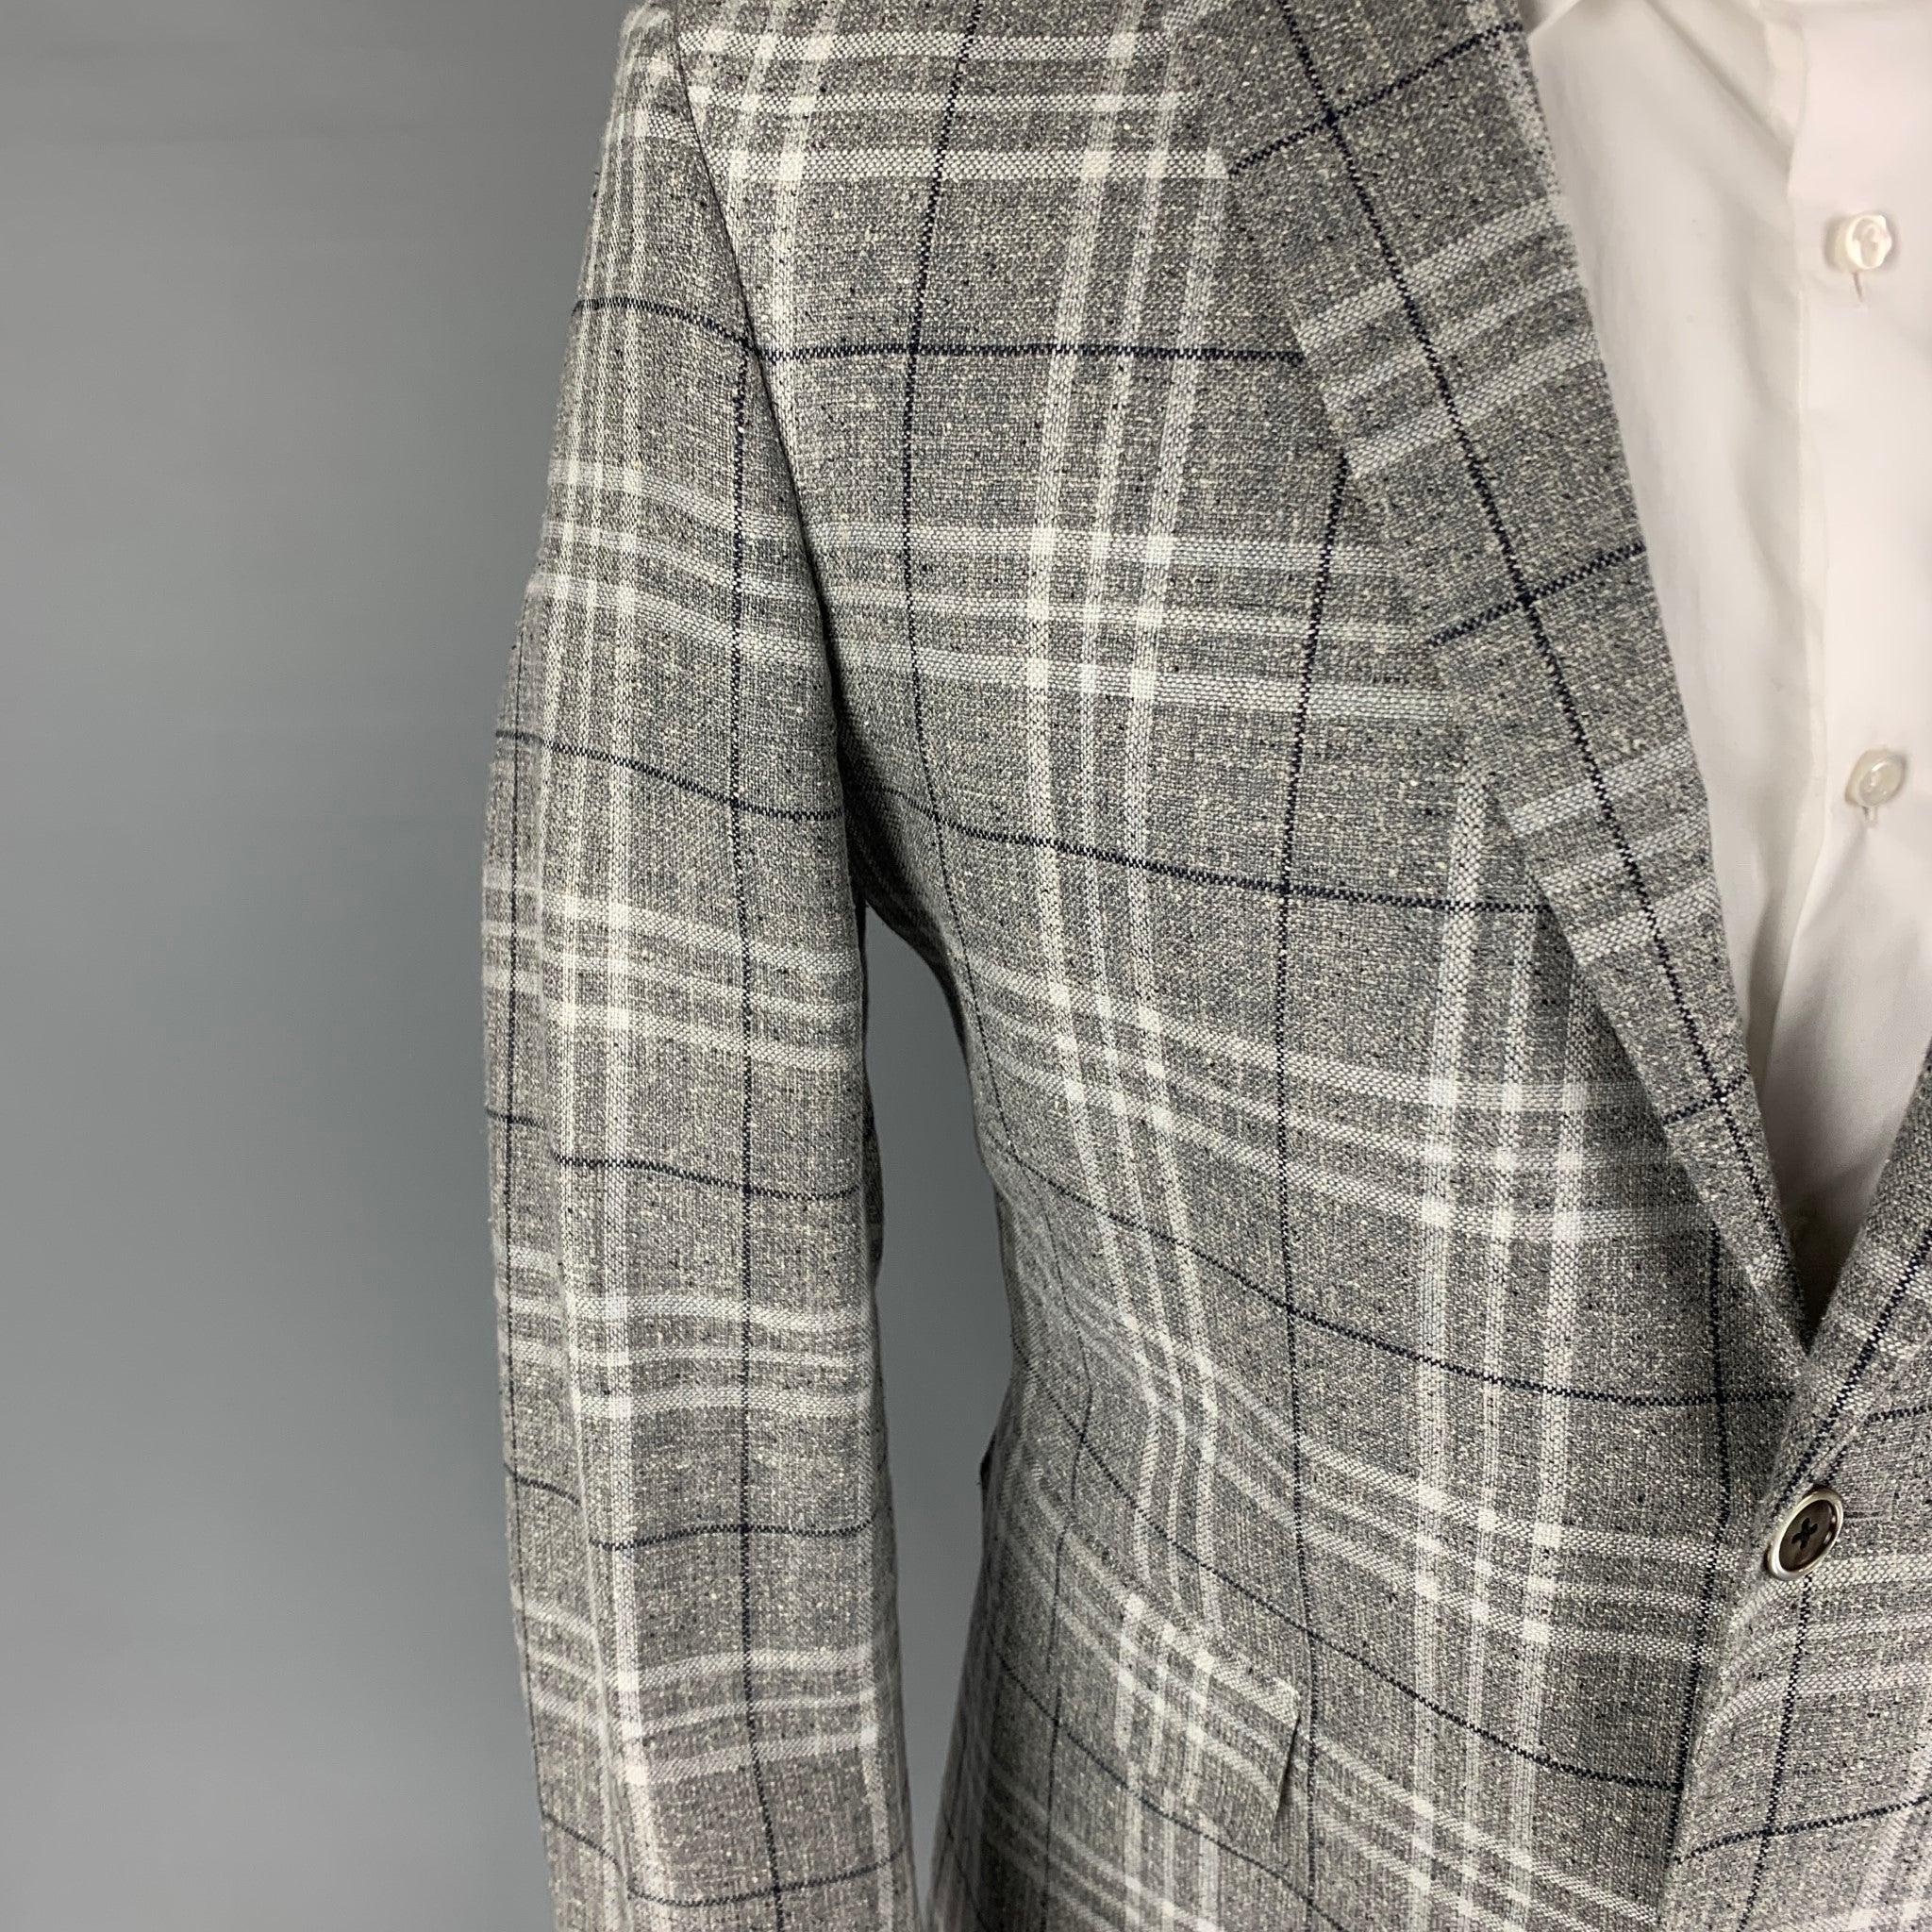 BLACK FLEECE sport coat comes in a light grey plaid silk blend with a full liner featuring a notch lapel, flap pockets, double back vent, and a double button closure. Made in USA.
Excellent
Pre-Owned Condition. 

Marked:   BB2  

Measurements: 
